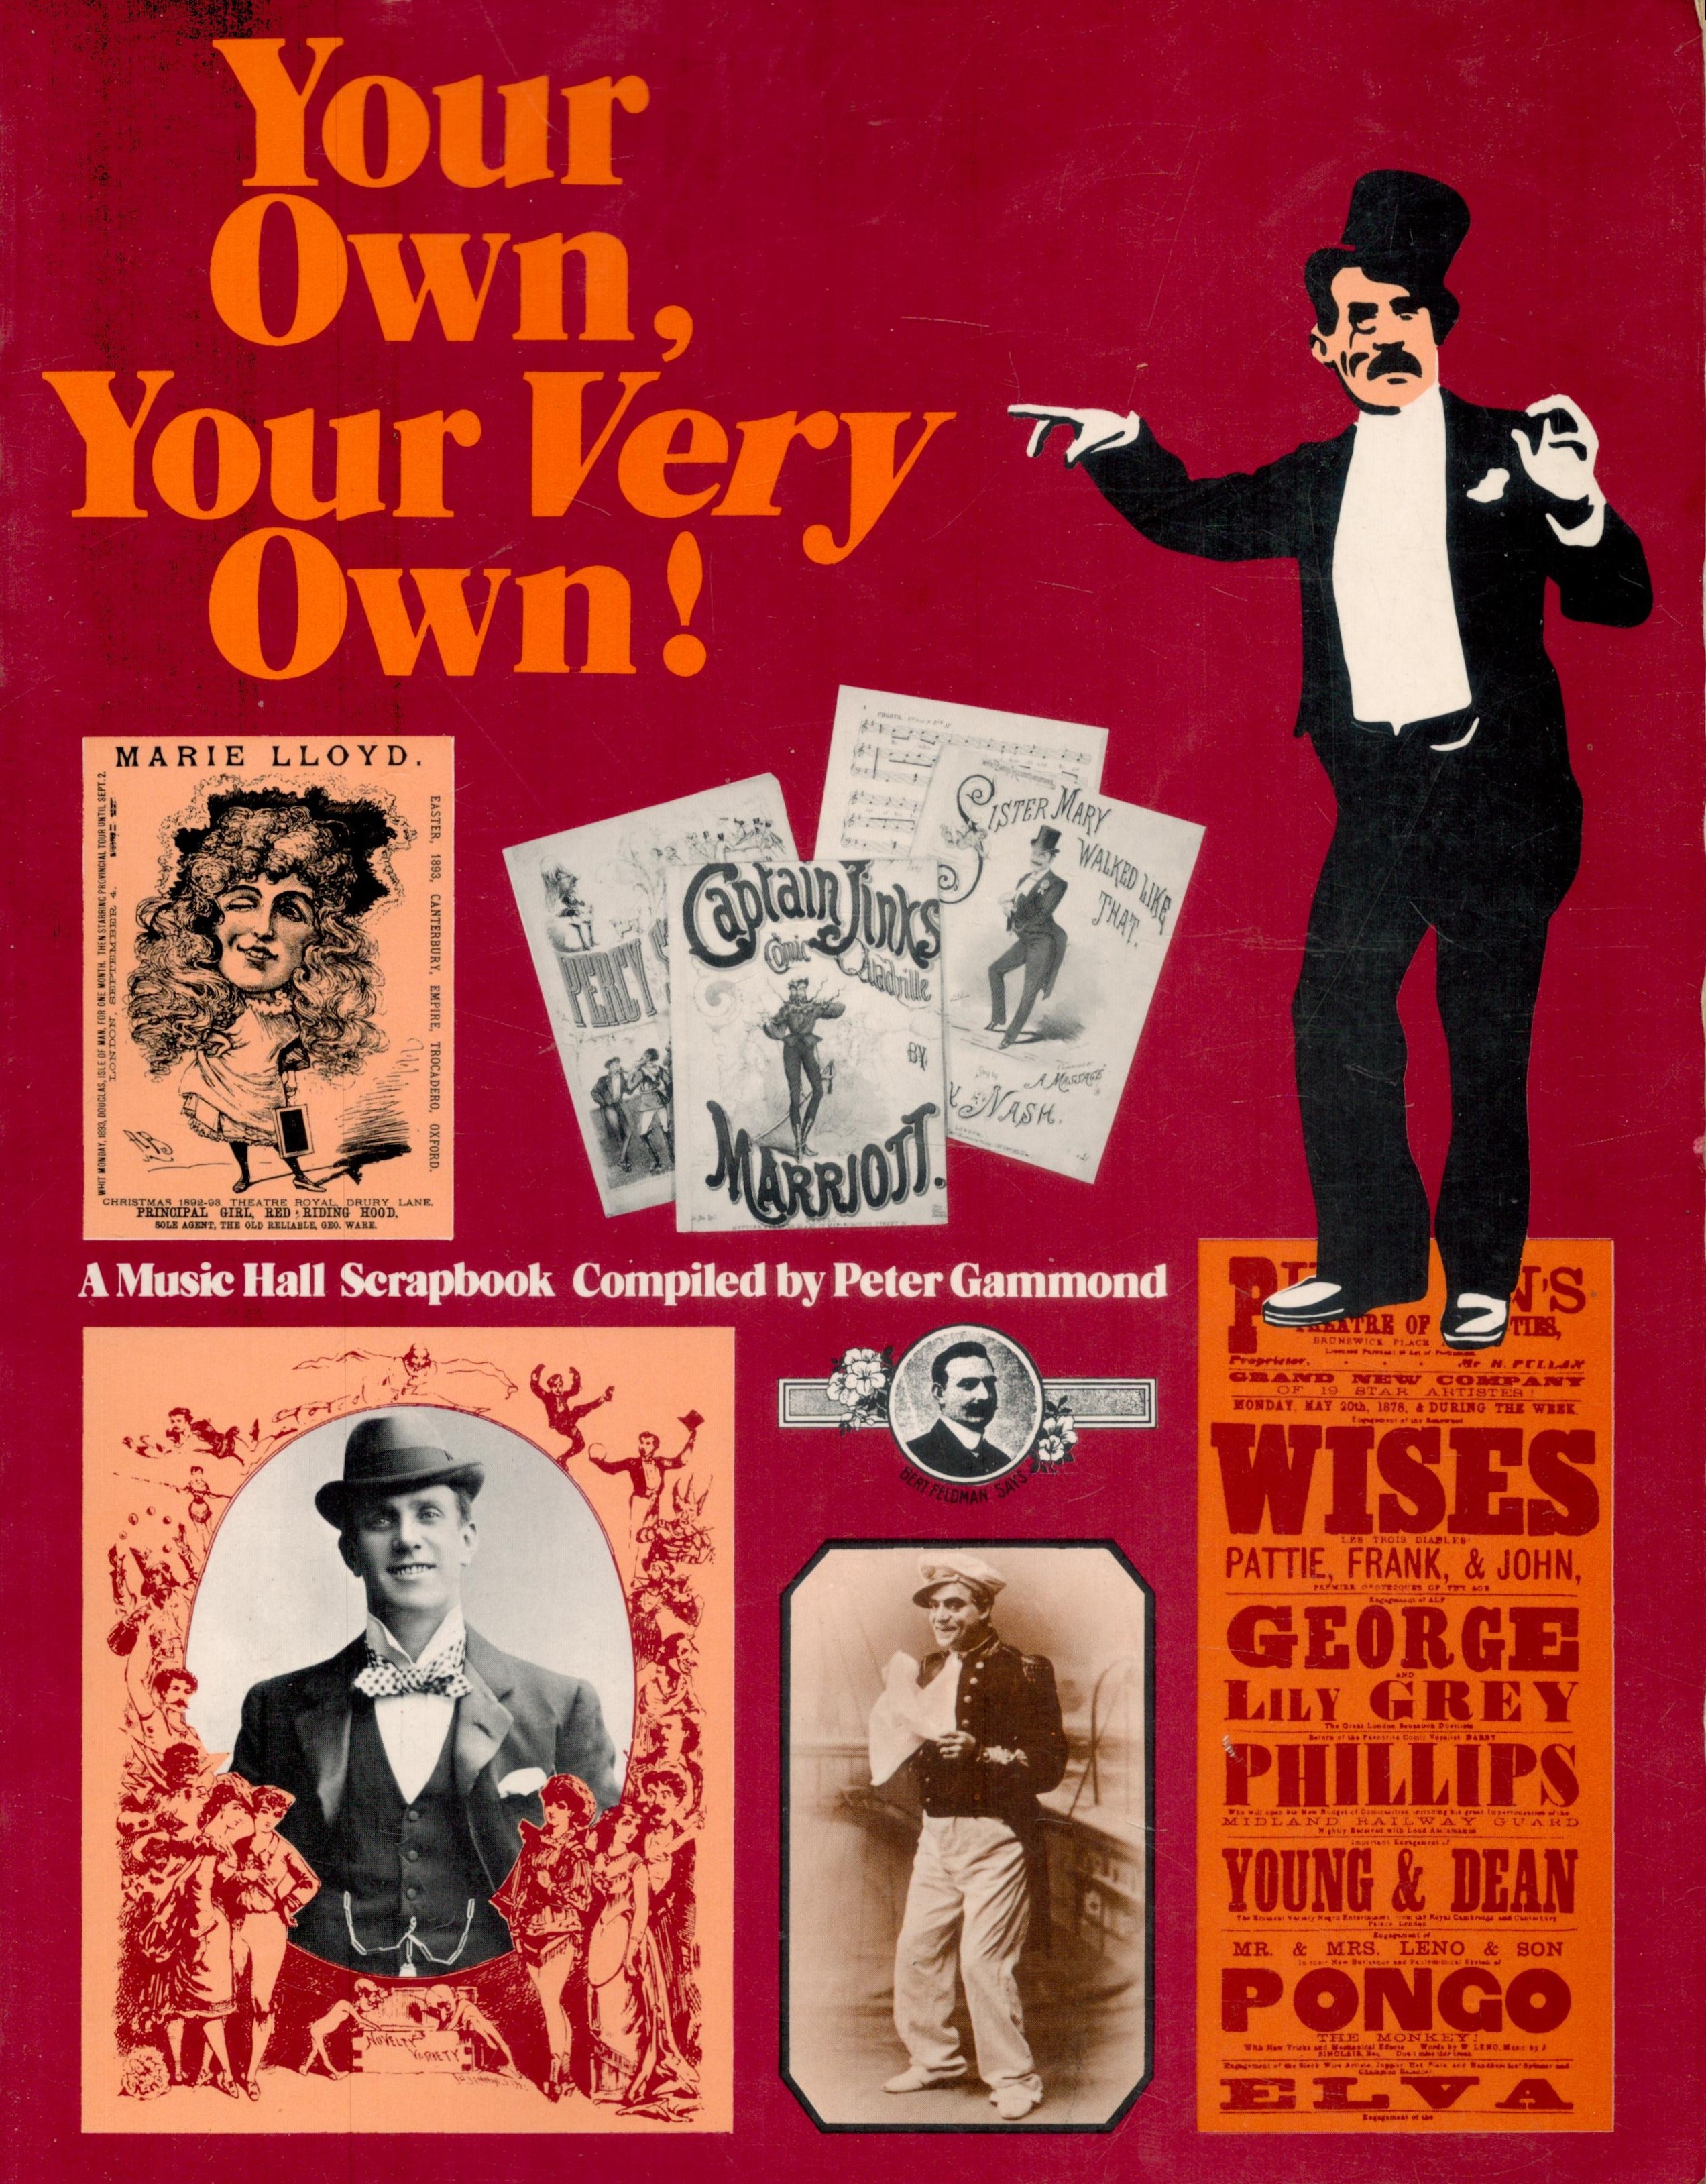 Your Own, Your Very Own! A Music Hall Scrapbook, compiled by Peter Gammond. Published by Ian4 Allan,